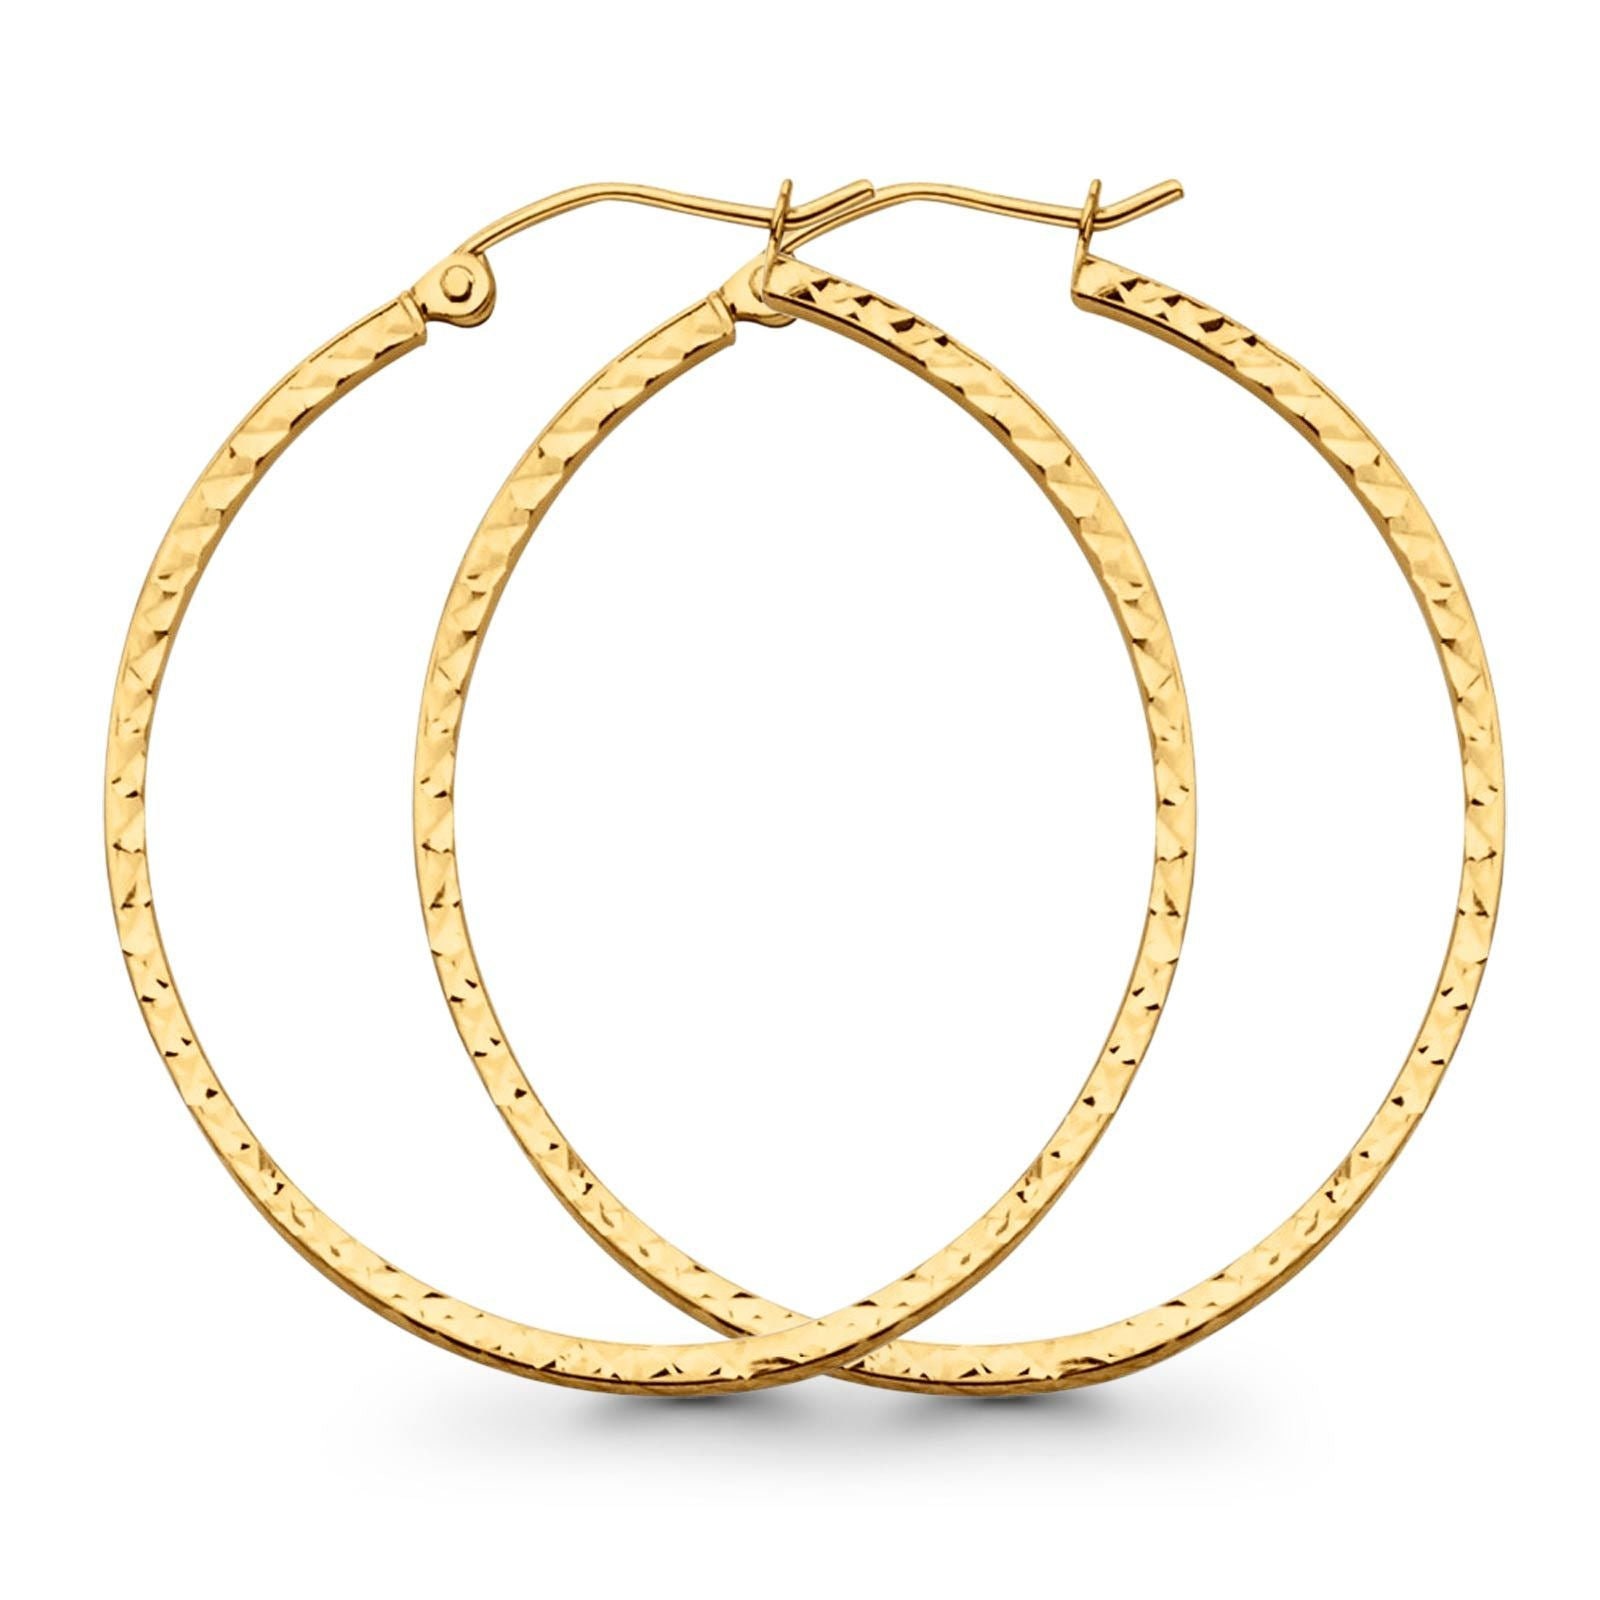 Details about   14K Yellow Gold Diamond Cut Square Tube Hoop Earrings Diameter 35mm 